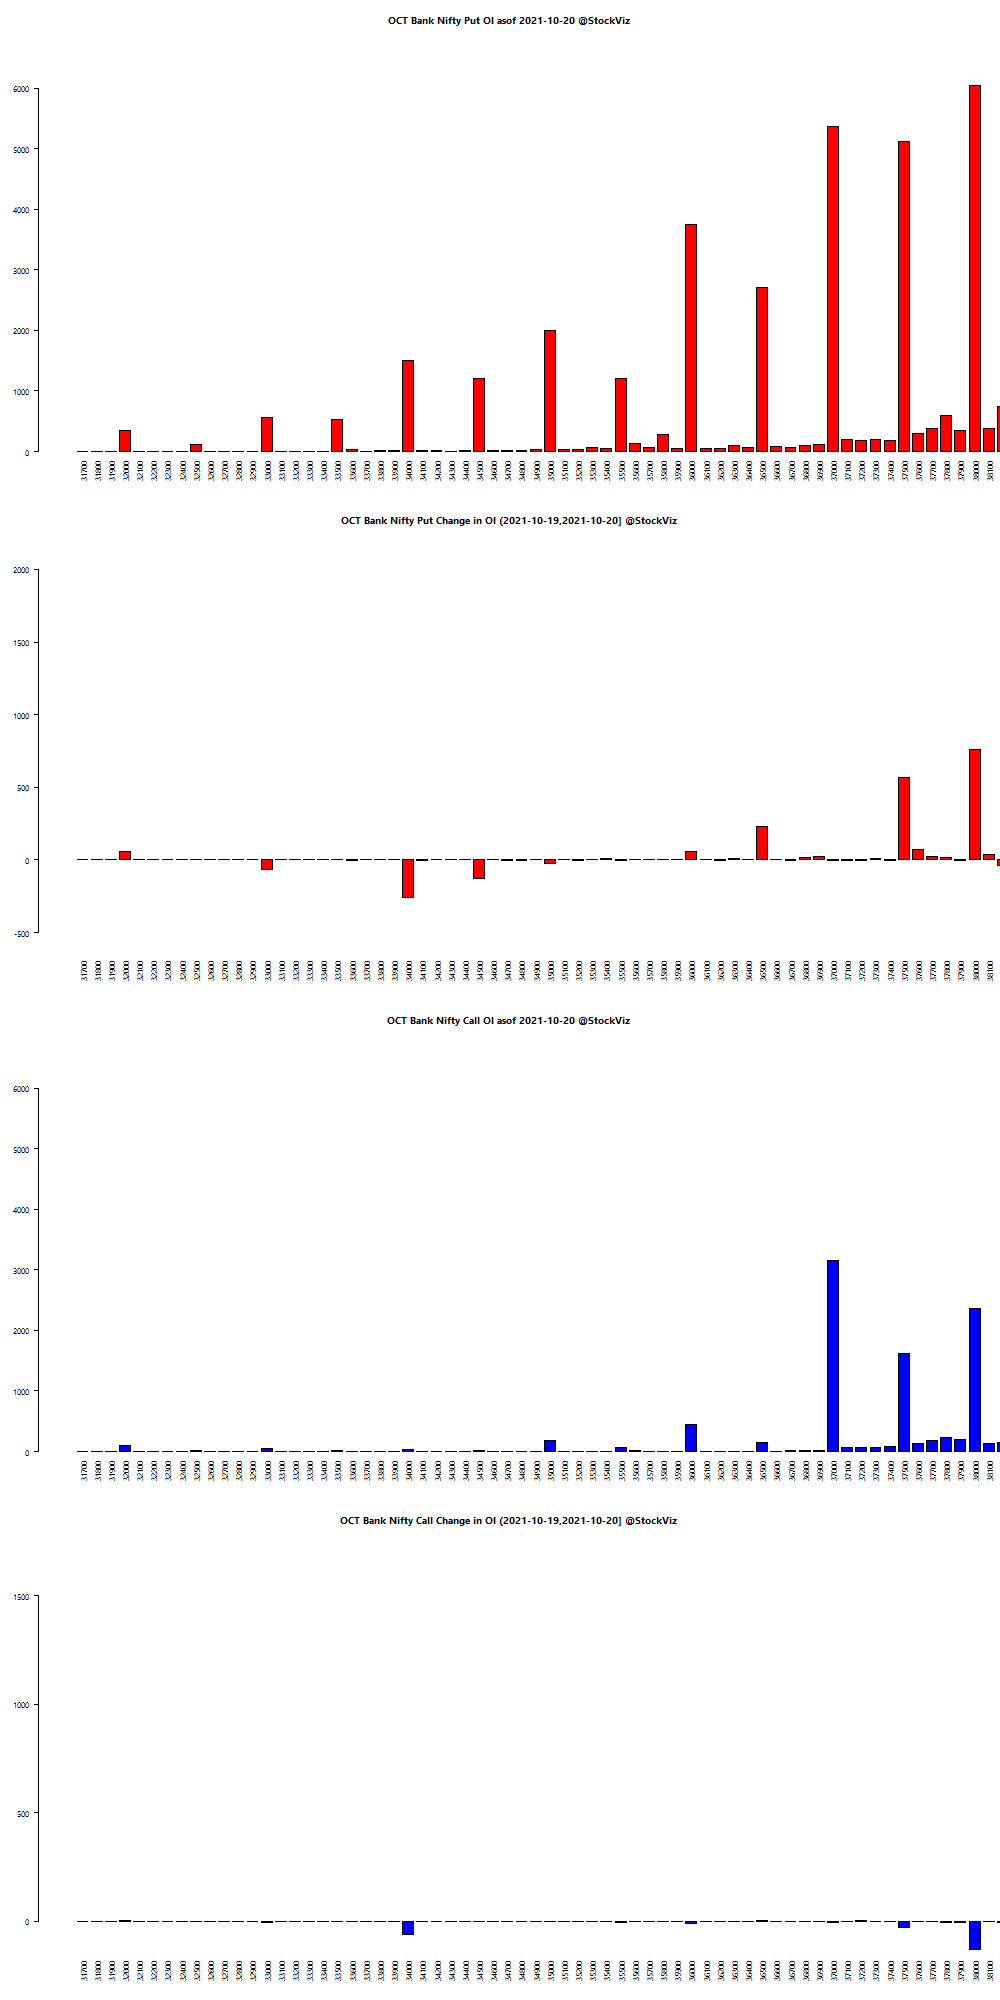 OCT BANKNIFTY OI chart